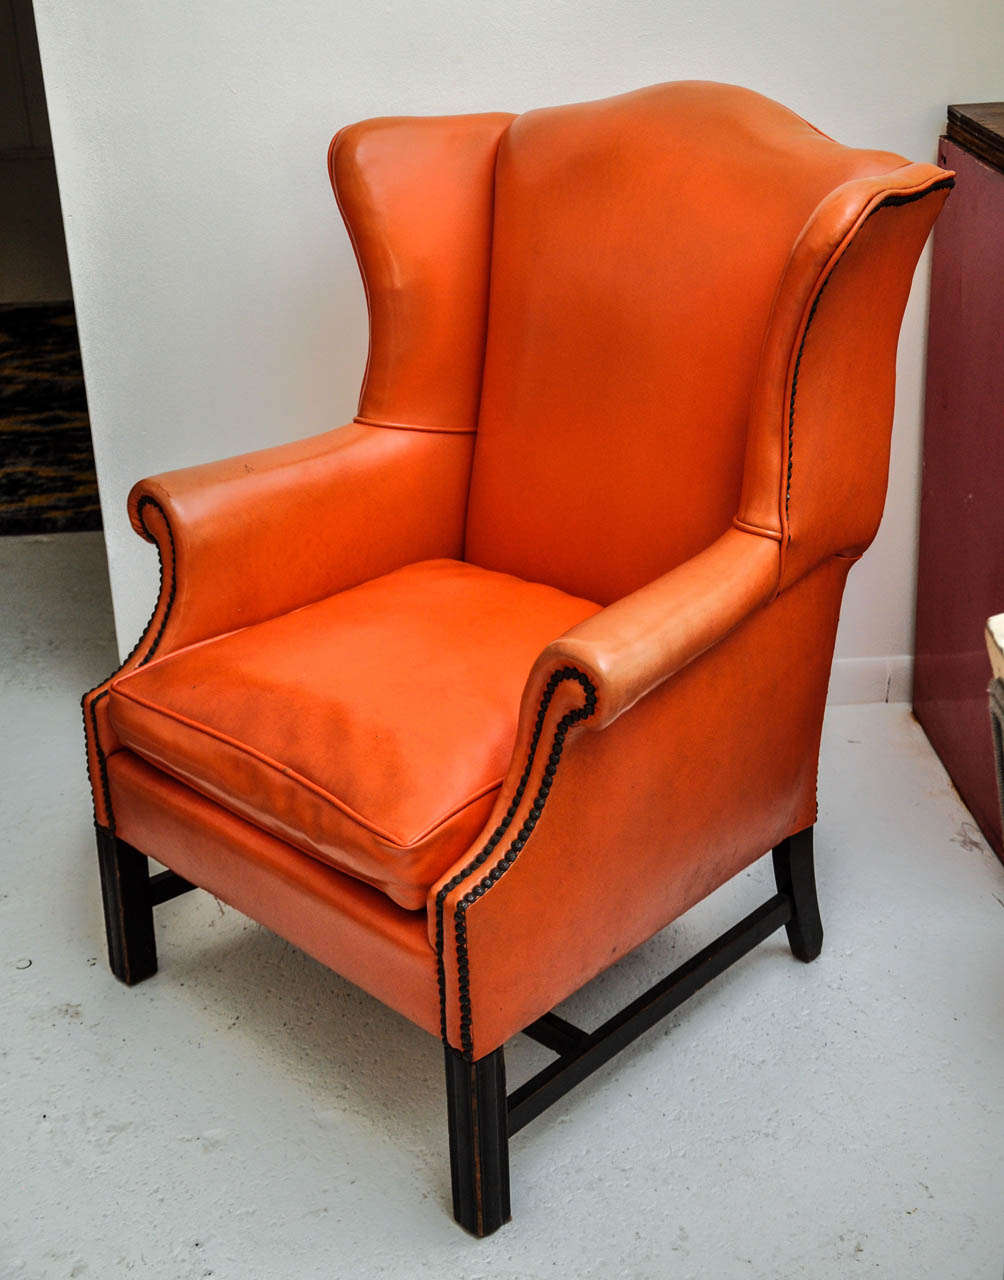 Vintage Orange Leather Wing Chair with distressed espresso wood base and antique brass nailhead trim